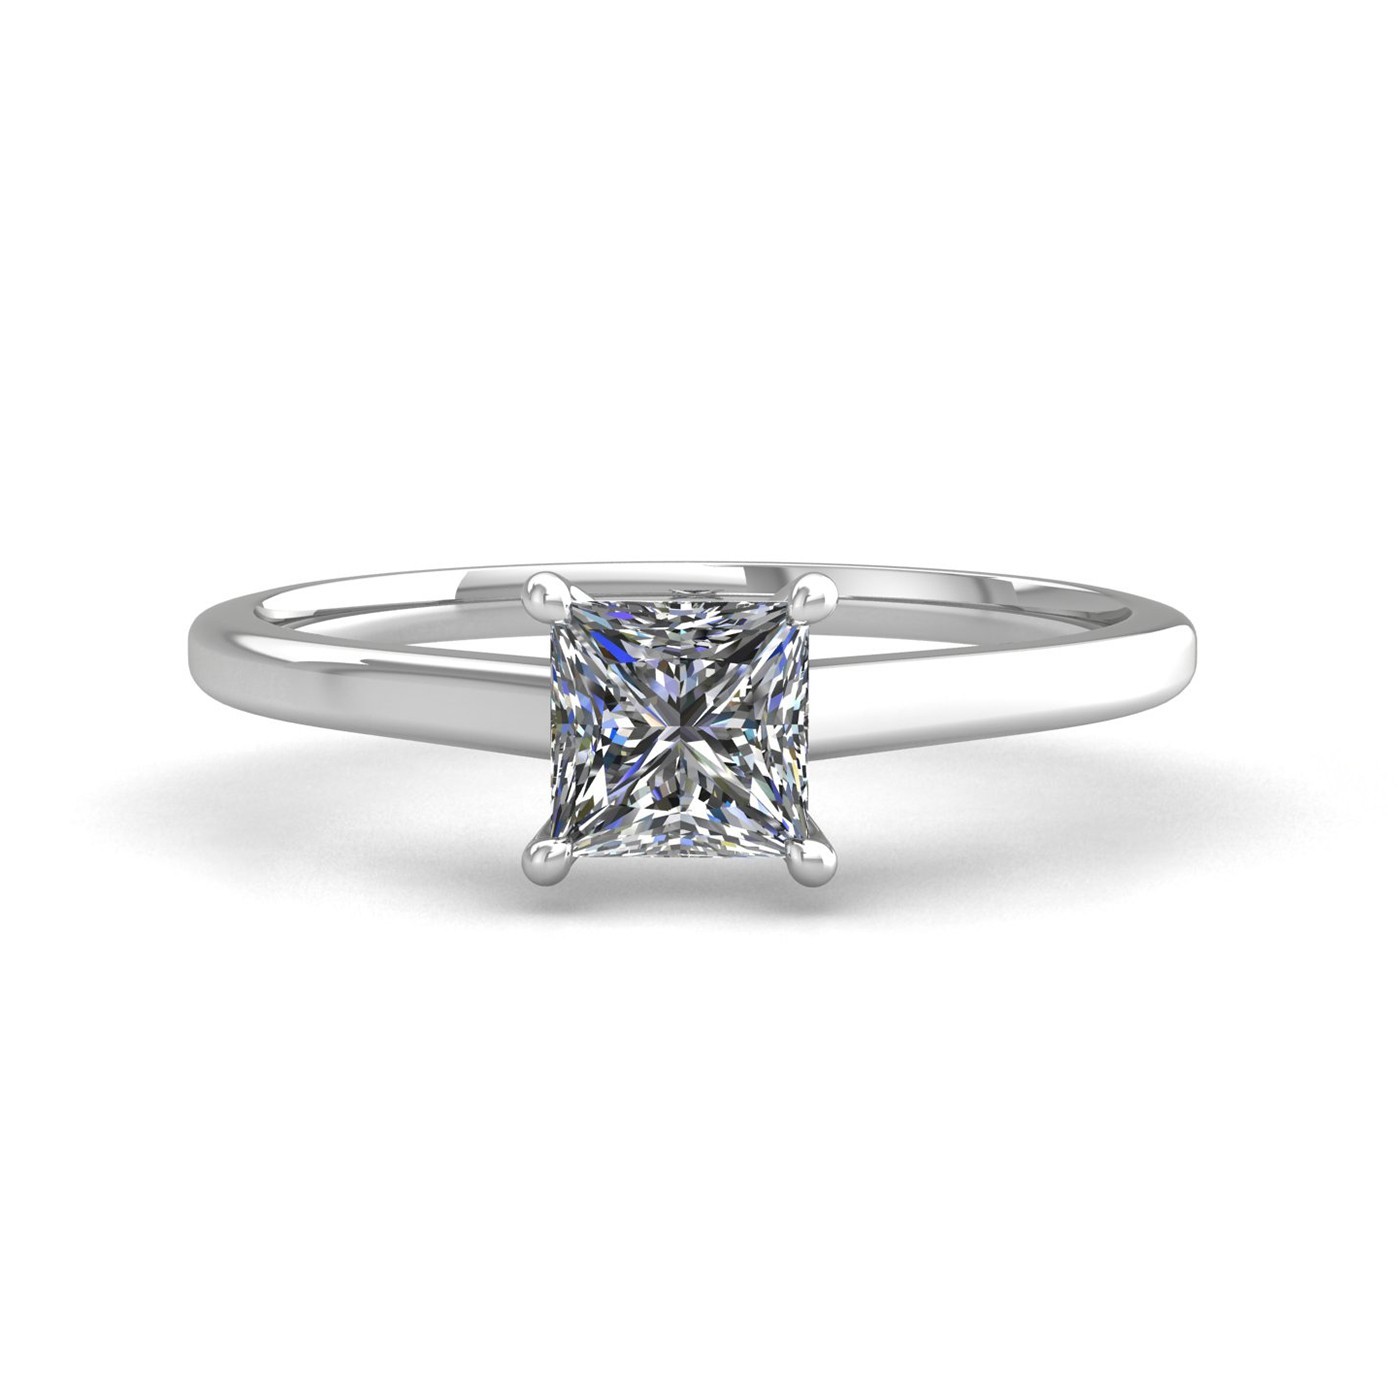 18k white gold  1,00 ct 4 prongs solitaire princess cut diamond engagement ring with whisper thin band Photos & images